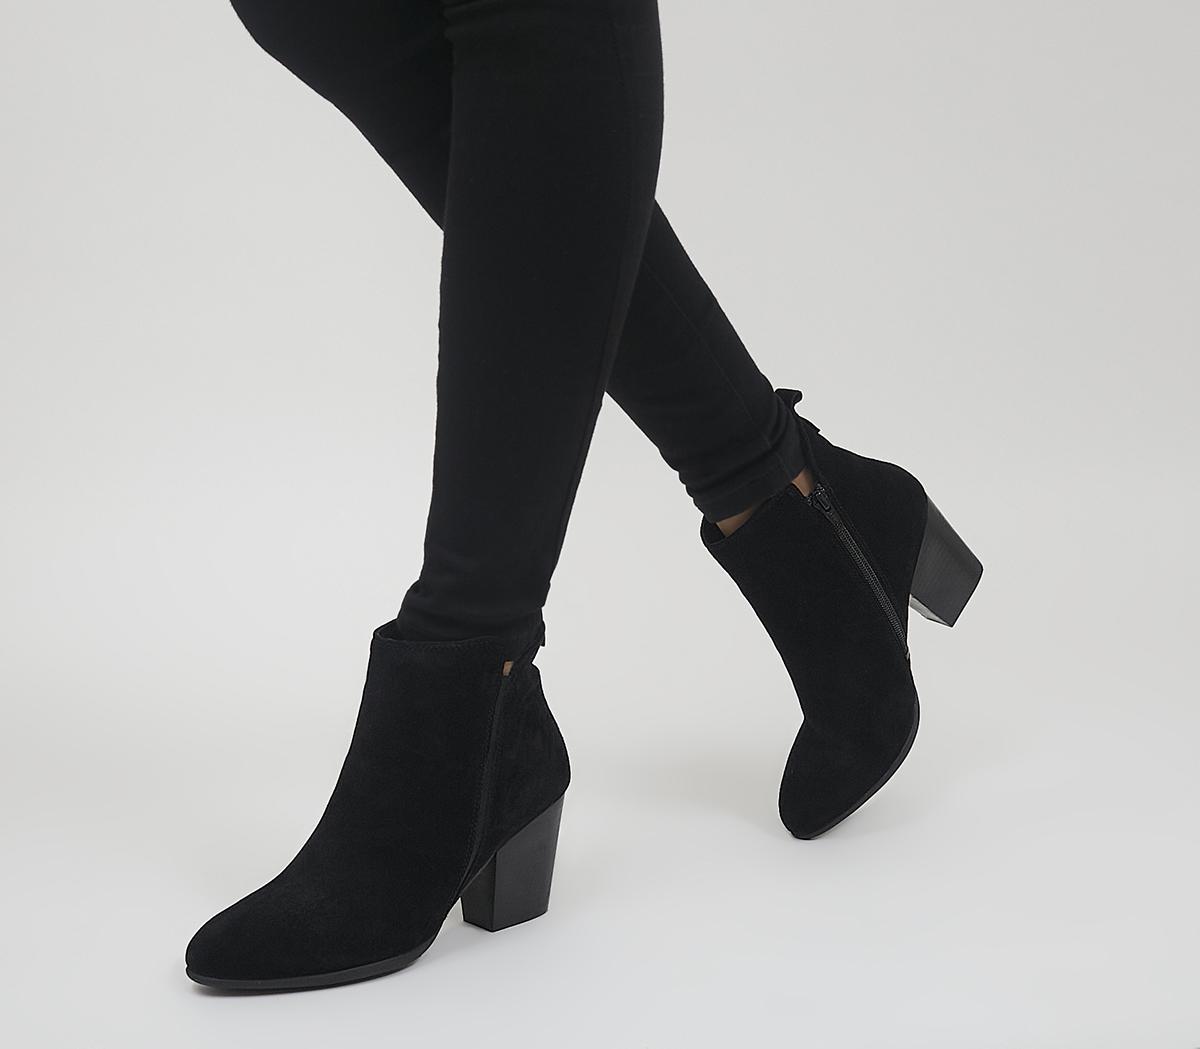 Ravel Madruga Suede Heeled Ankle Boot - Brown | very.co.uk